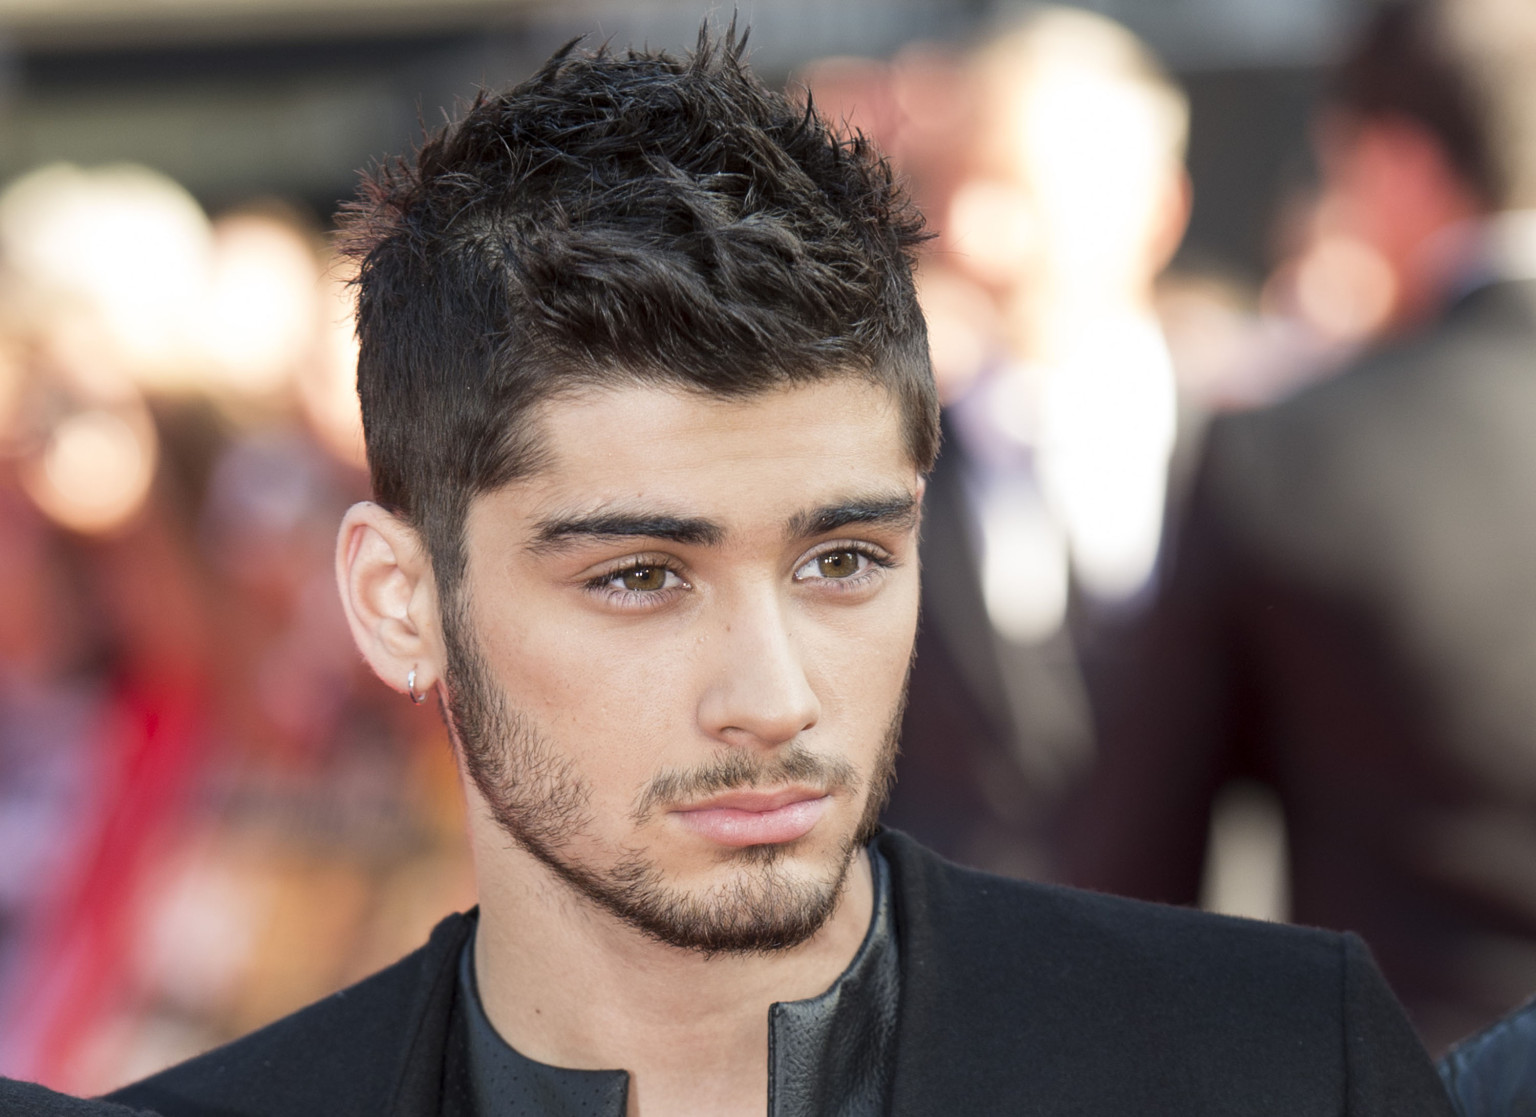 Zayn Malik And Perrie Edwards Are Engaged, Her Mom Confirms
